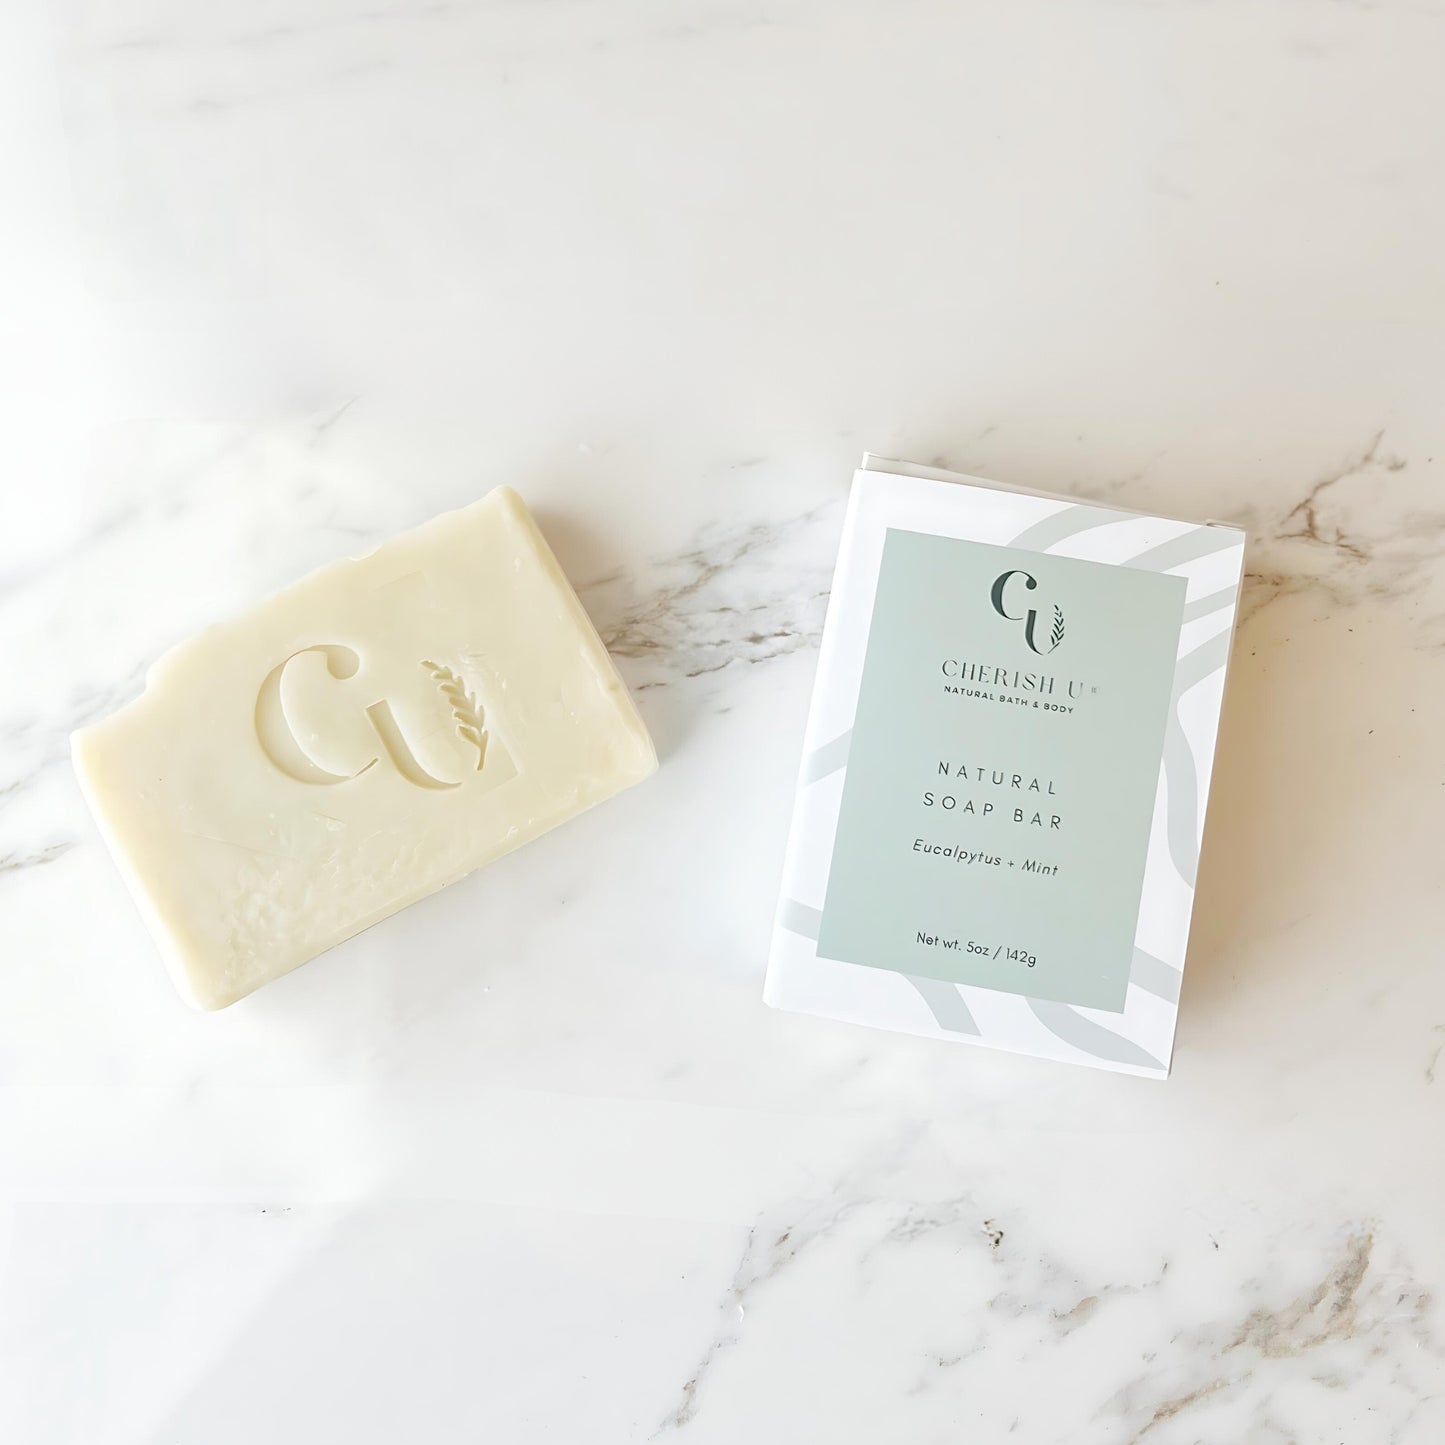 All-natural Eucalyptus + Mint Soap, infused with invigorating eucalyptus and refreshing mint essential oils, designed to cleanse and revitalize the skin. Cherish U®